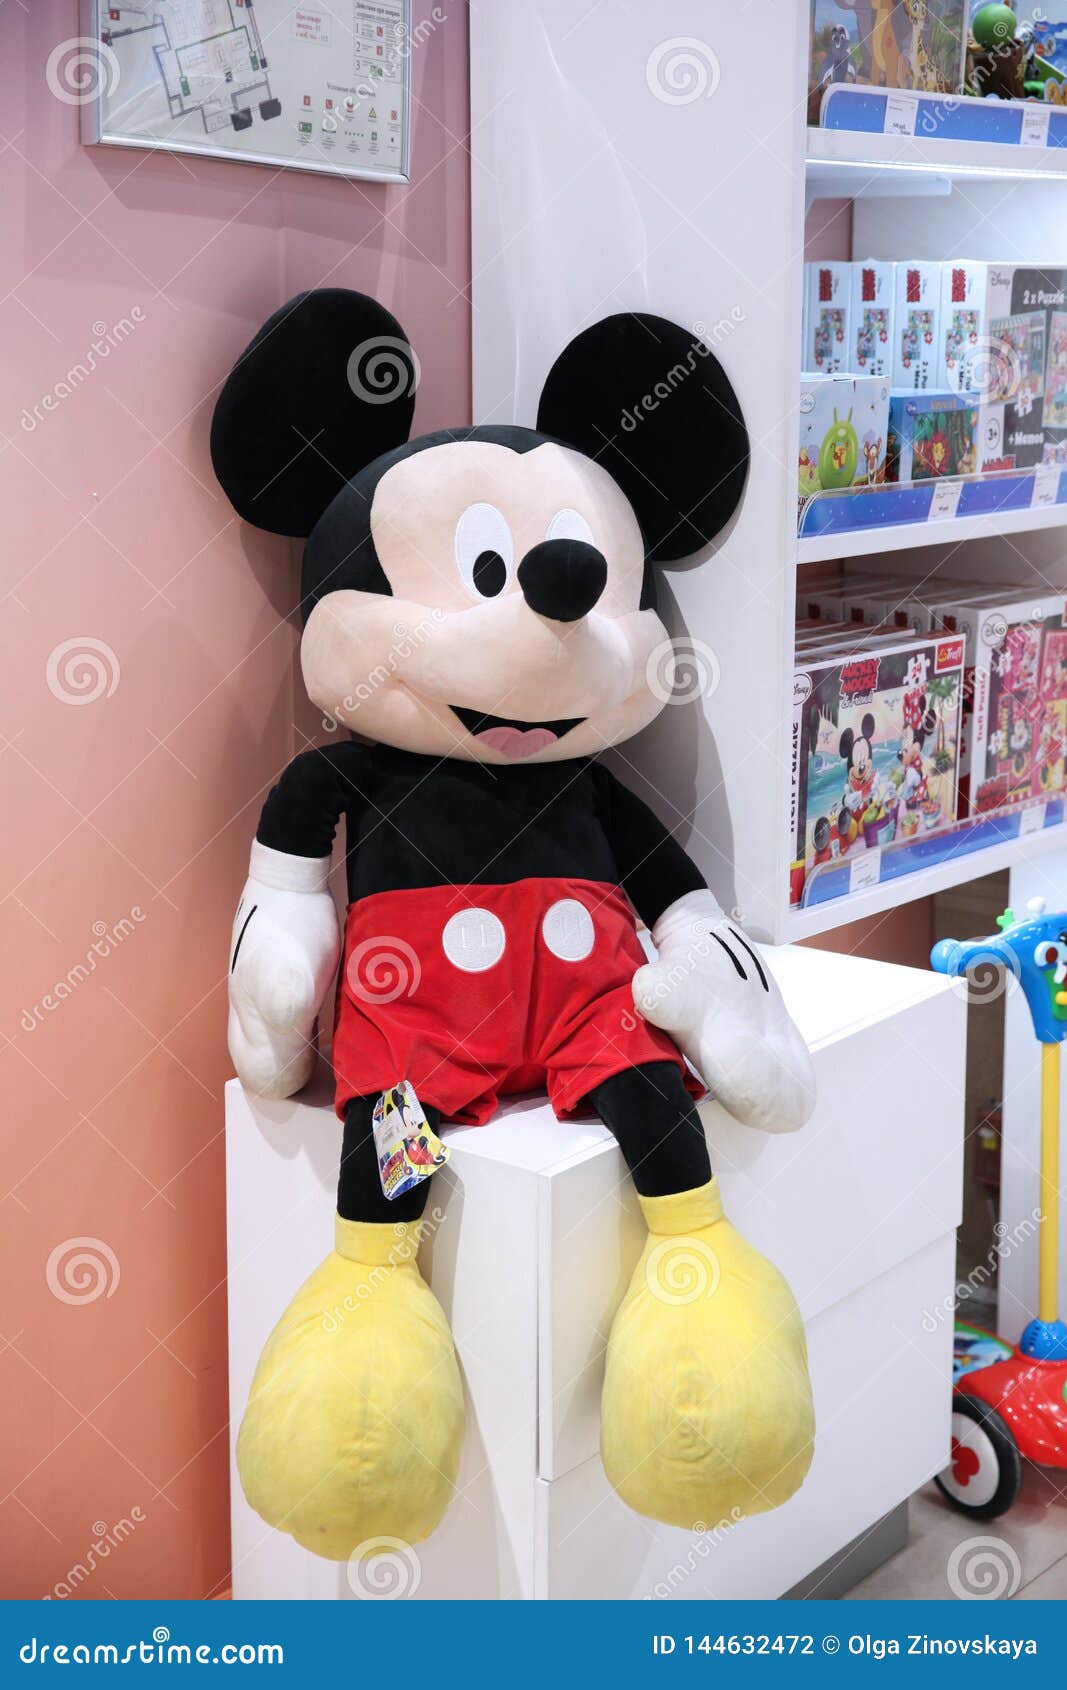 mickey mouse soft toy big